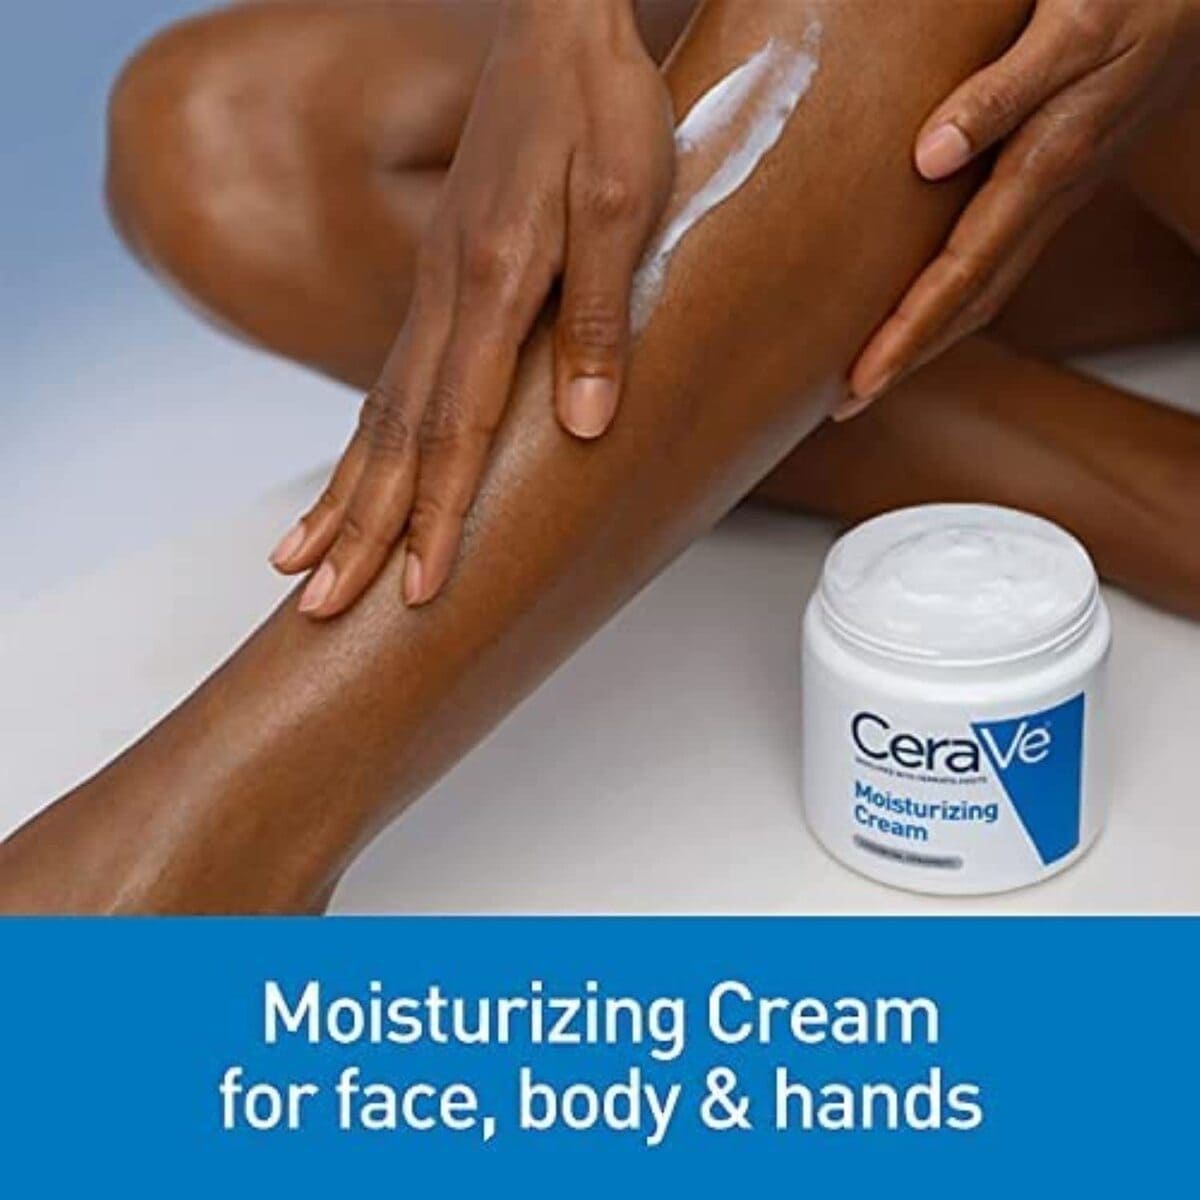 CeraVe Moisturizing Cream Body and Face Moisturizer for Dry Skin from Amazon